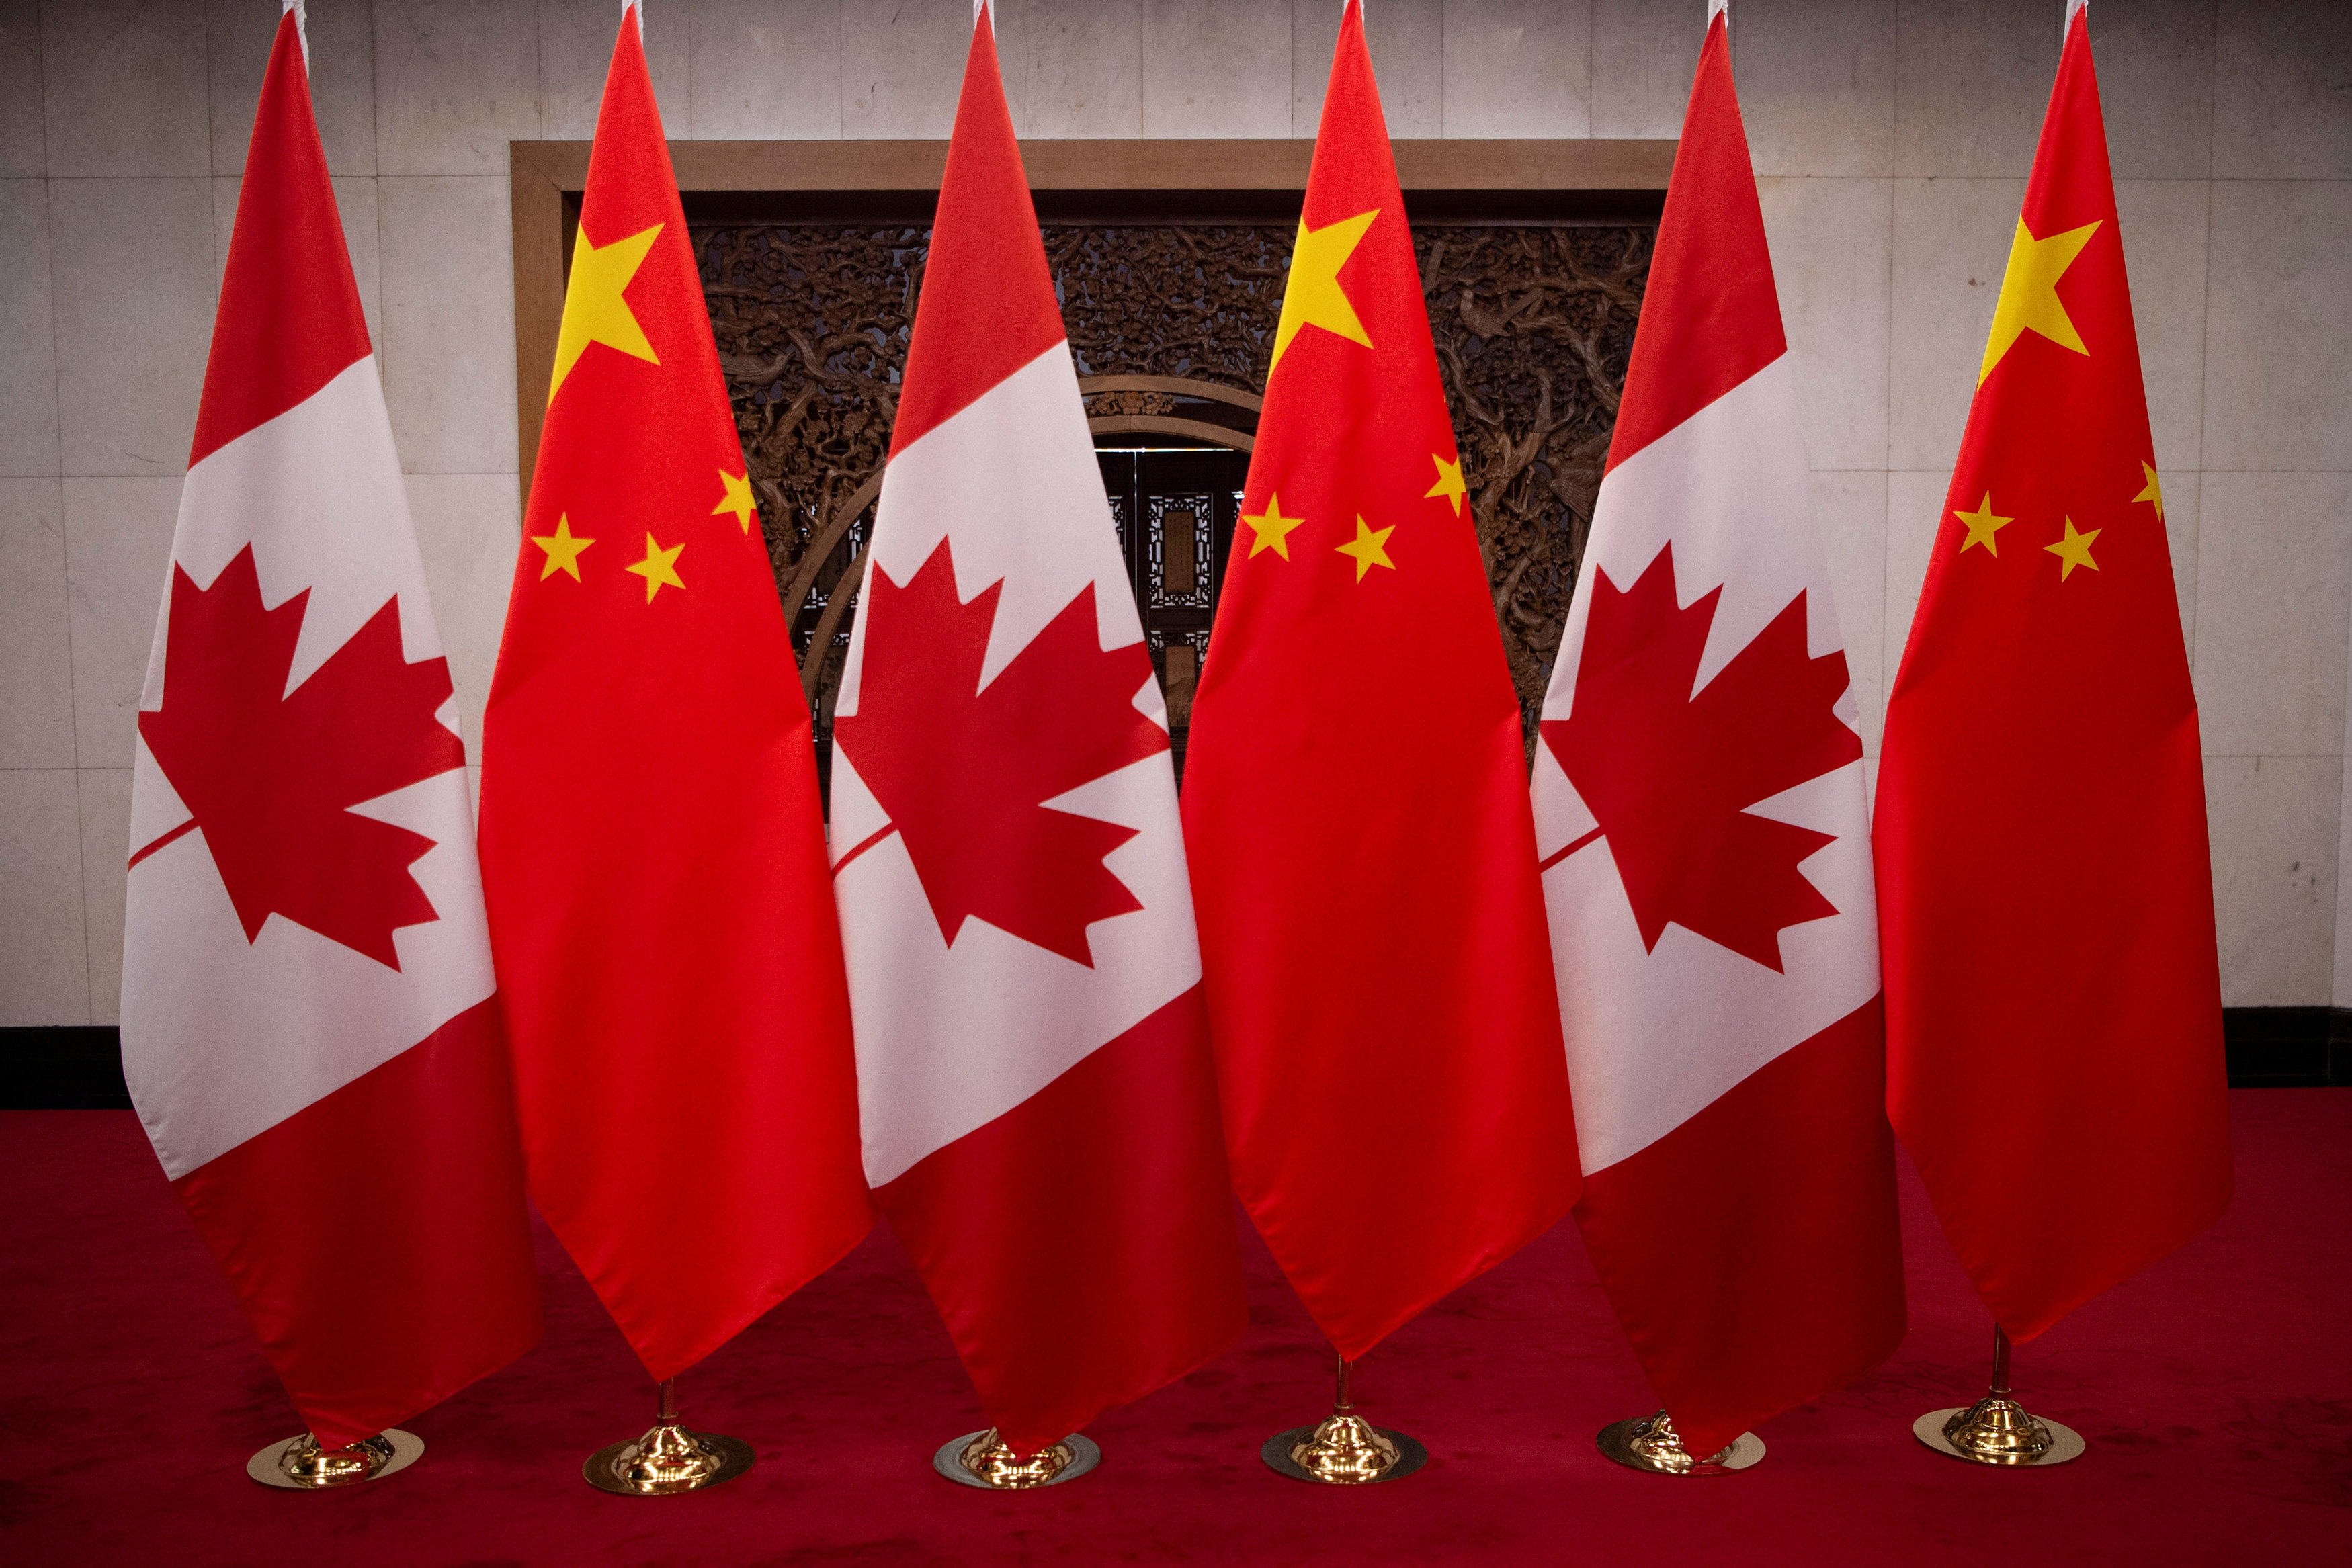 Canadian and Chinese flags are arranged at the Diaoyutai State Guesthouse in Beijing on December 5, 2017, prior to a meeting between Canada’s Prime Minister Justin Trudeau and China’s President Xi Jinping. Photo: Reuters